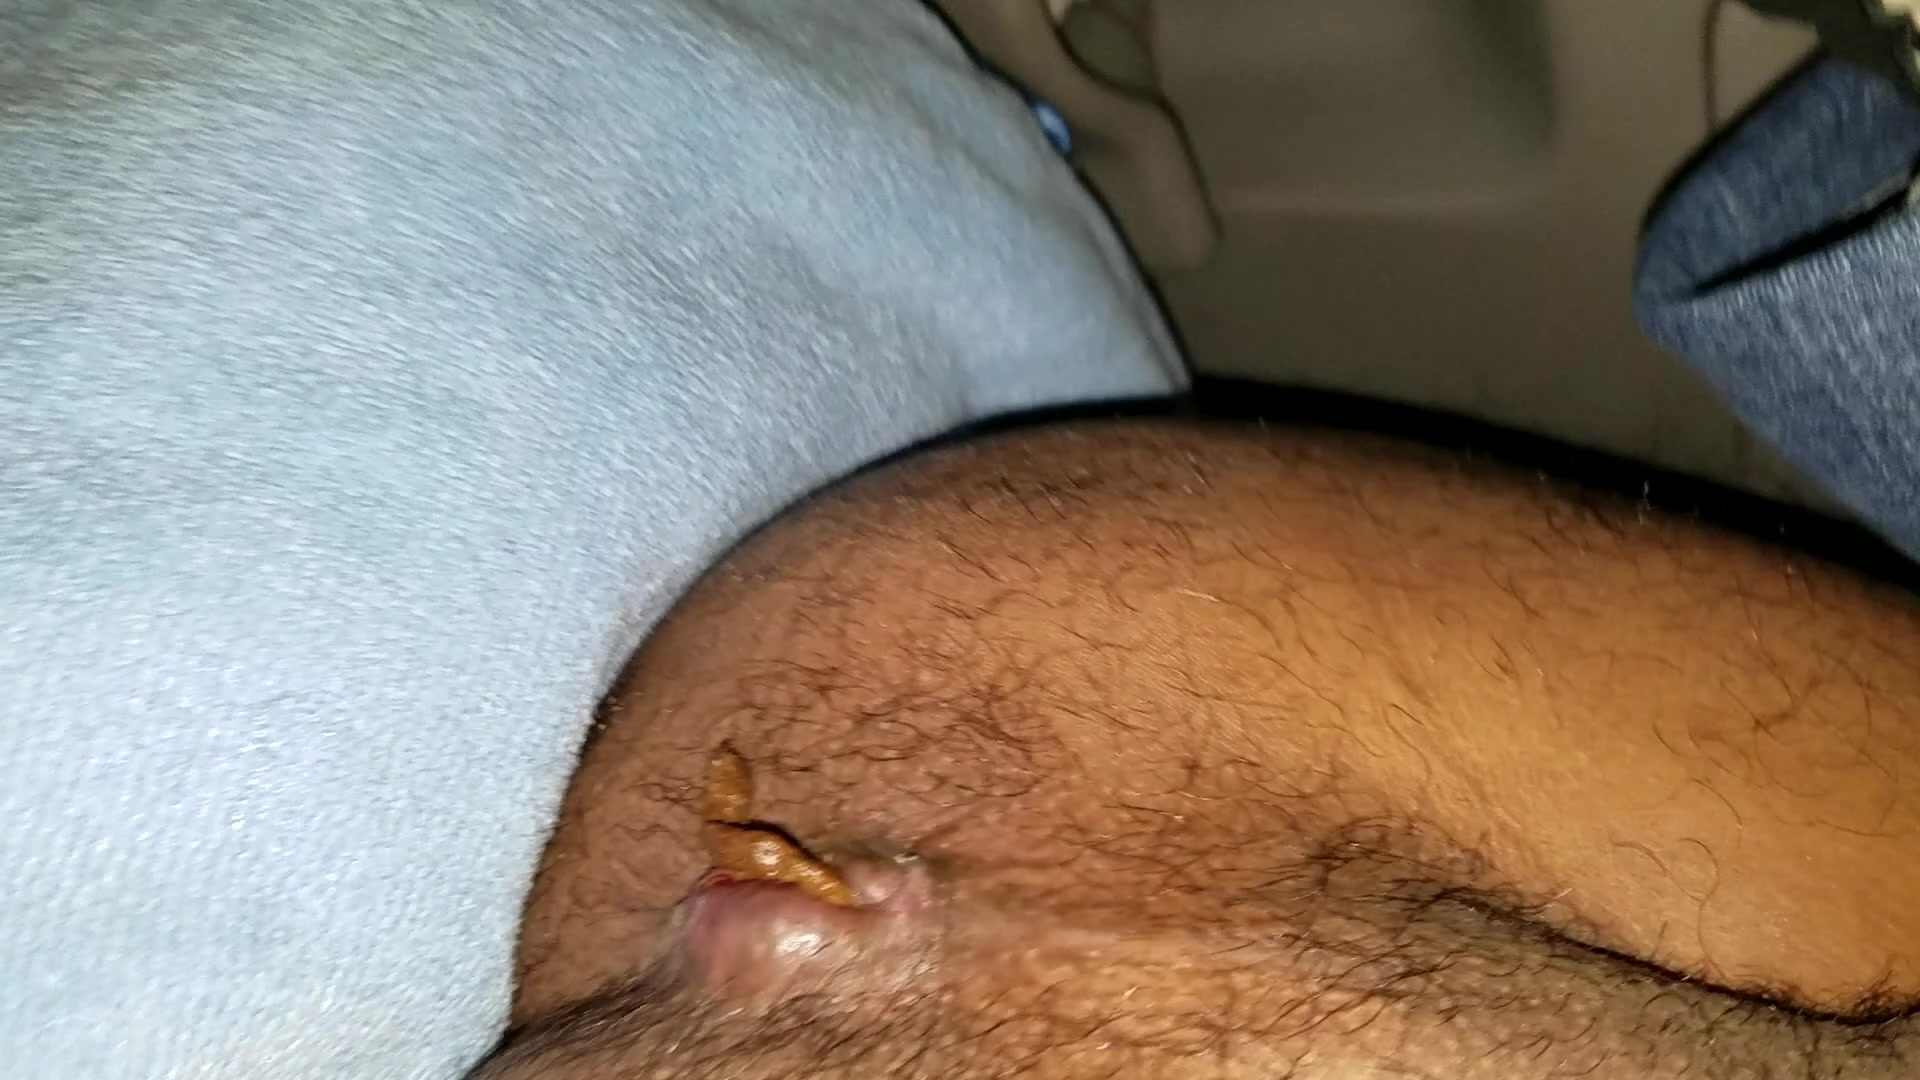 Mexirican showing his shitty hole after he got fucked